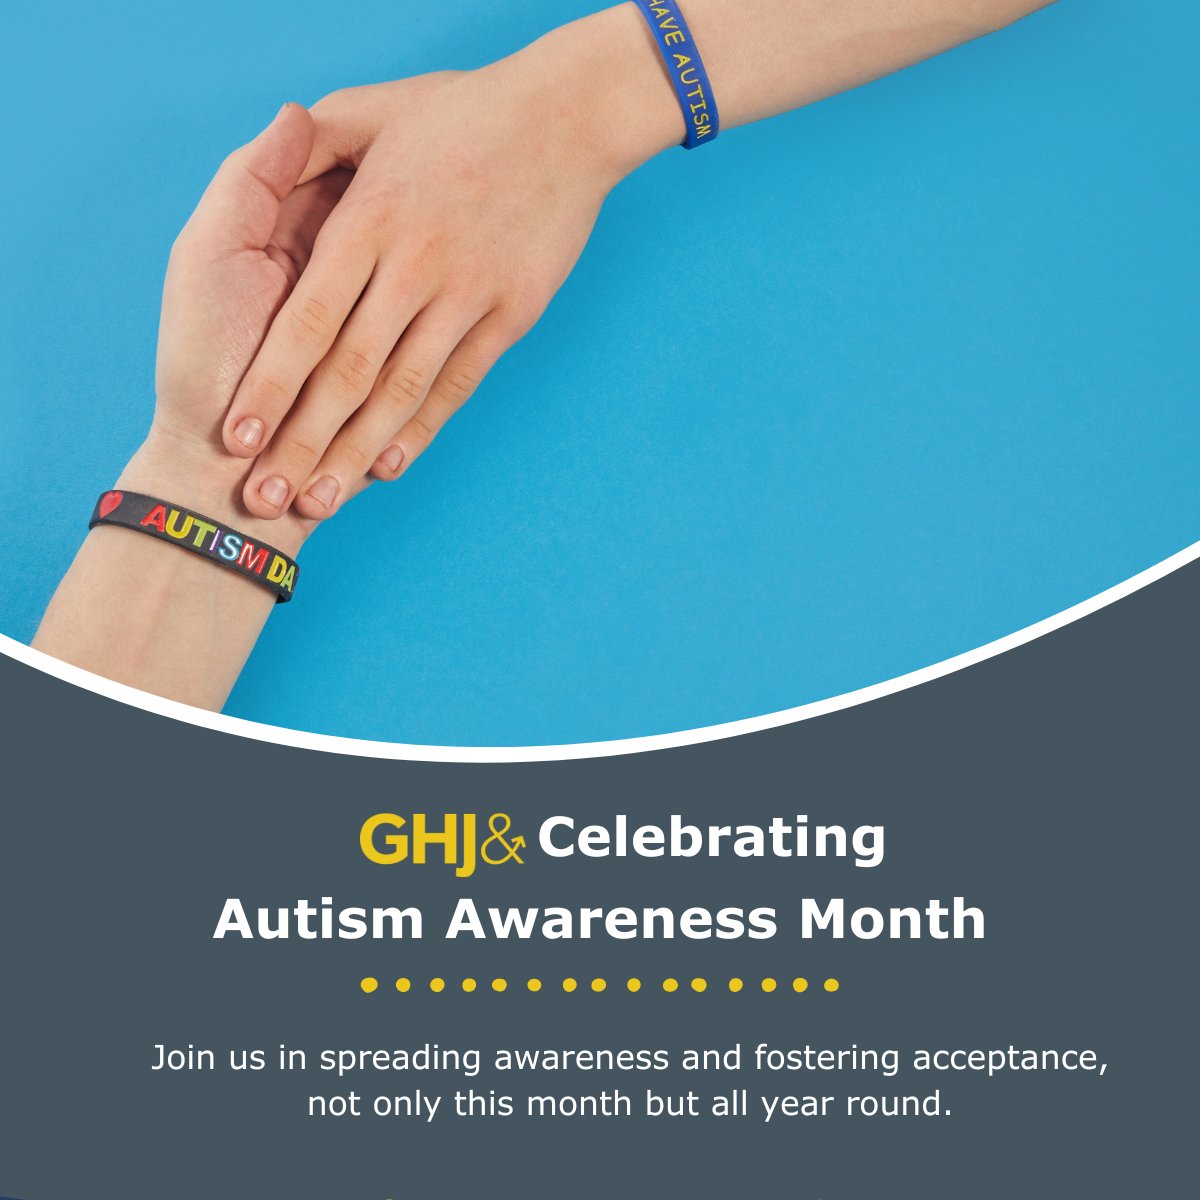 This #AutismAwarenessMonth, #TeamGHJ is celebrating inclusion and accessibility for all employees. Join us in spreading awareness and fostering acceptance, not only this month but all year round. #BeMore